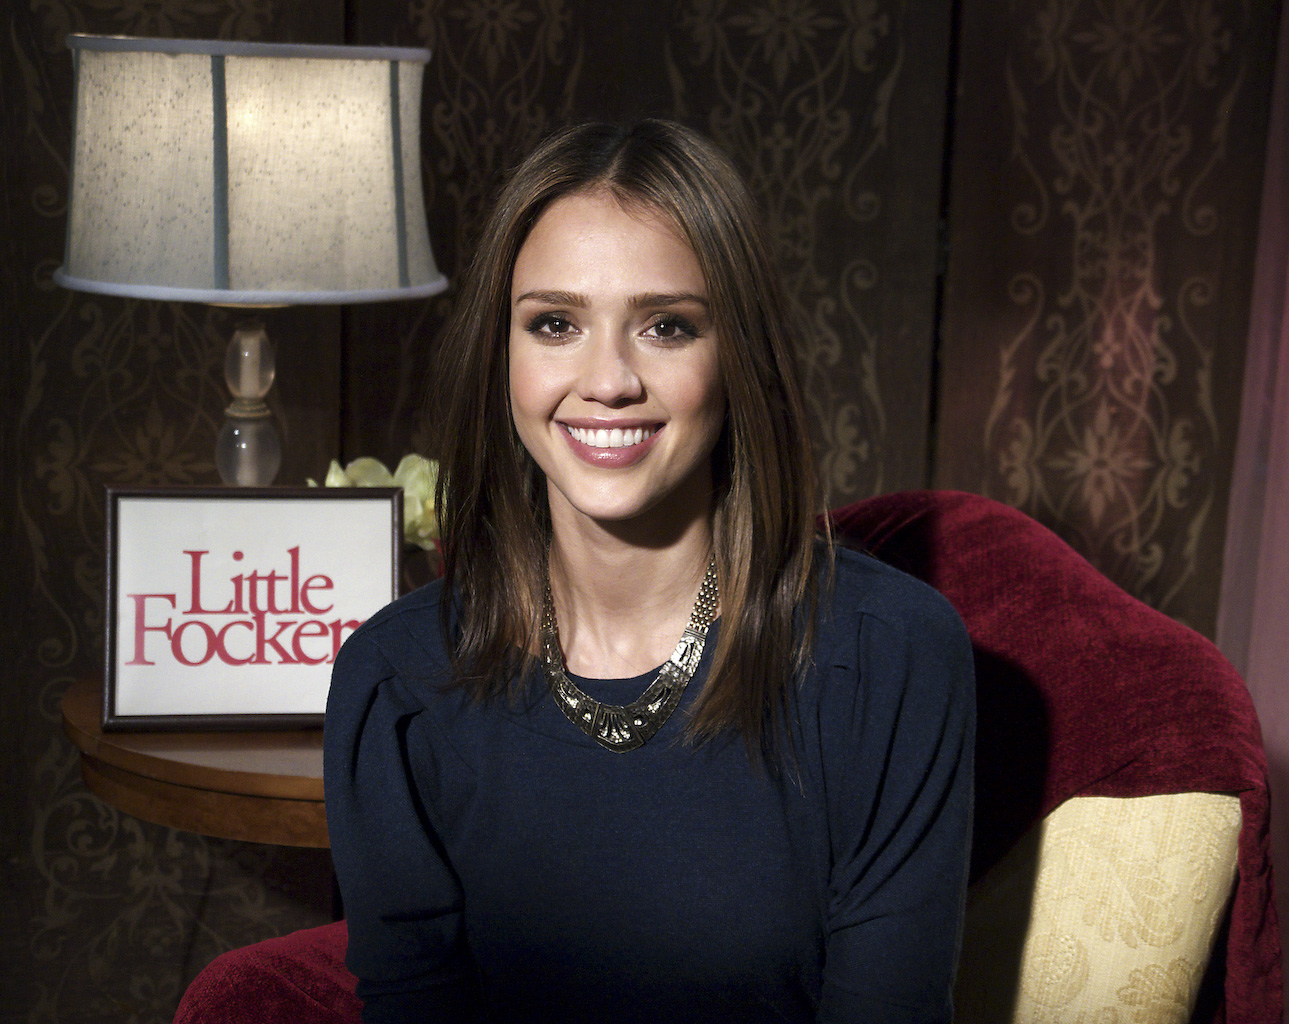 I had the pleasure to work with Jessica Alba during the Little Fockers Media Junket.